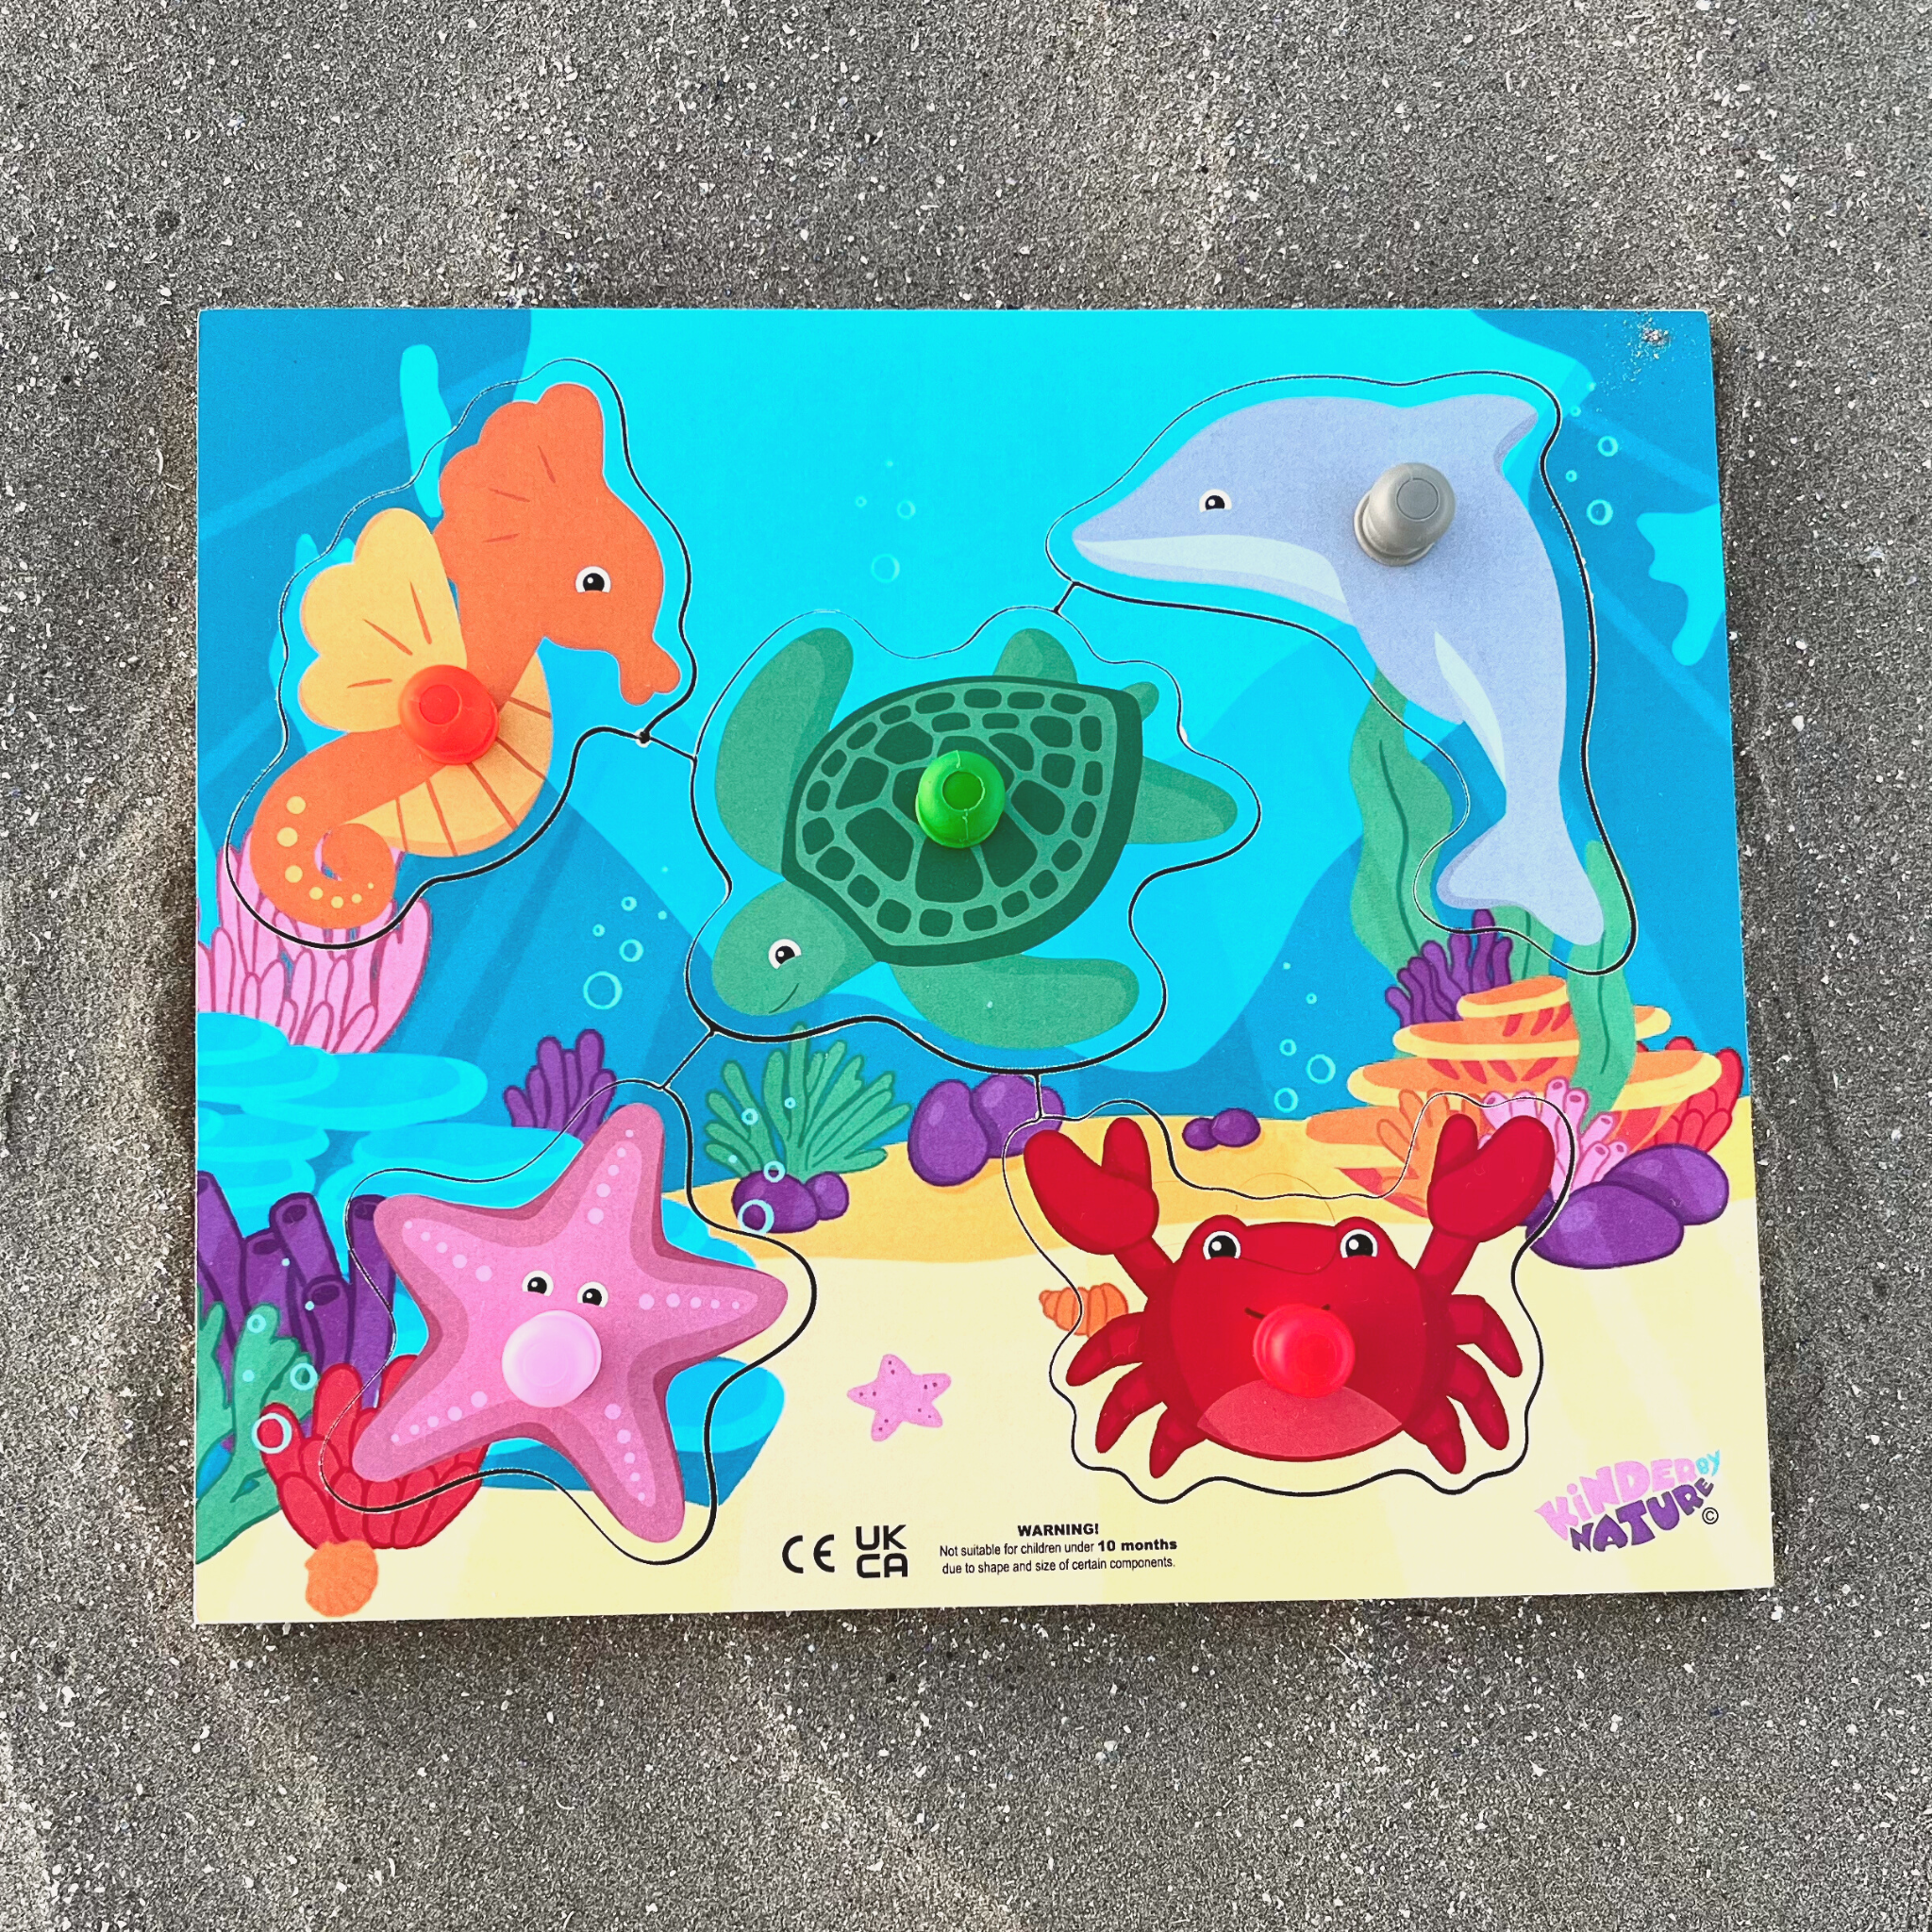 Under the Sea Jigsaw Puzzle